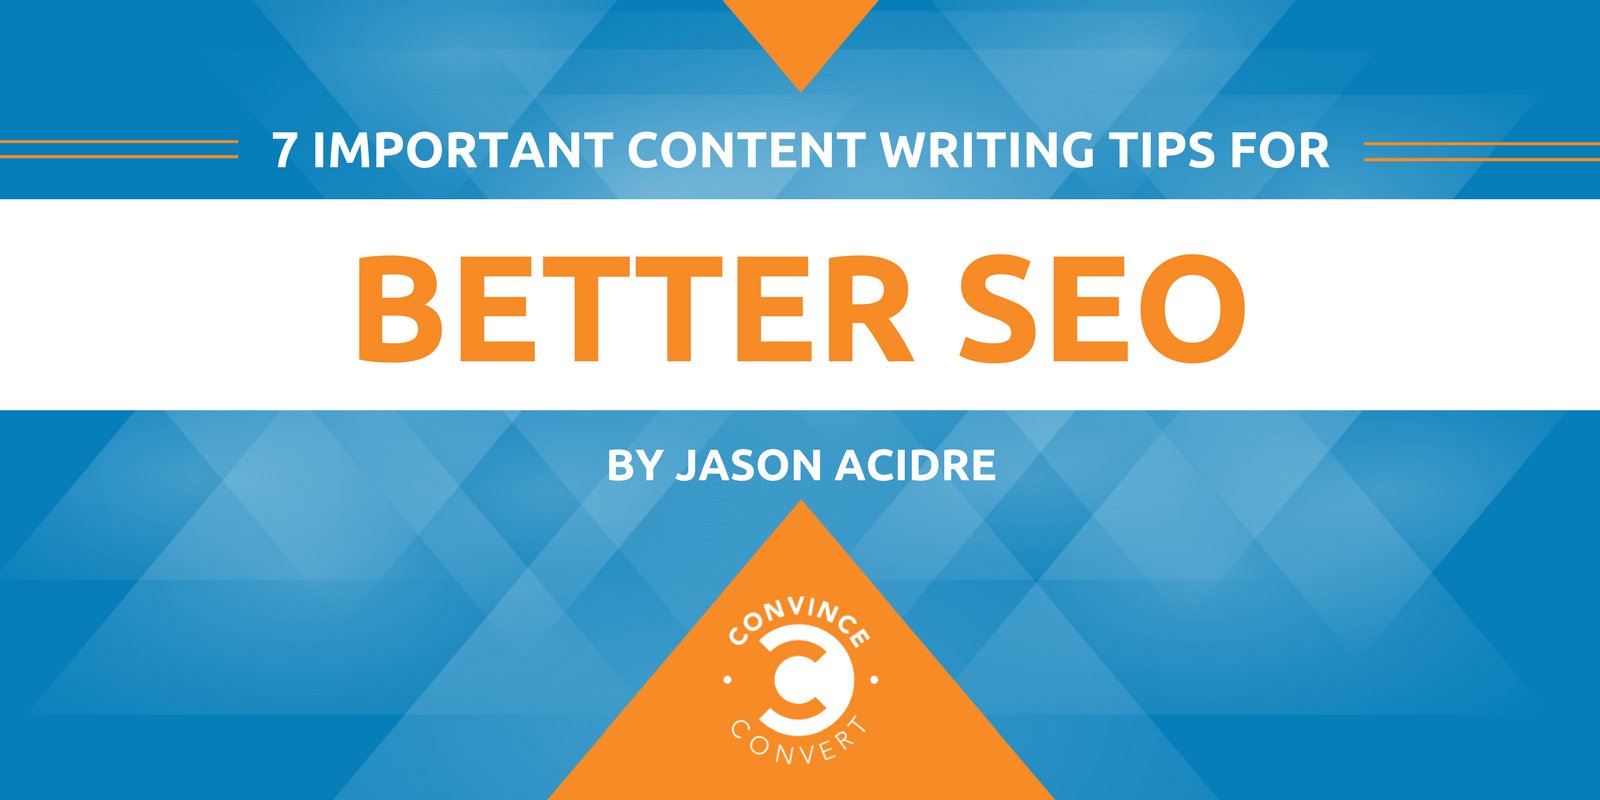 7 Important Content Writing Tips for Better SEO